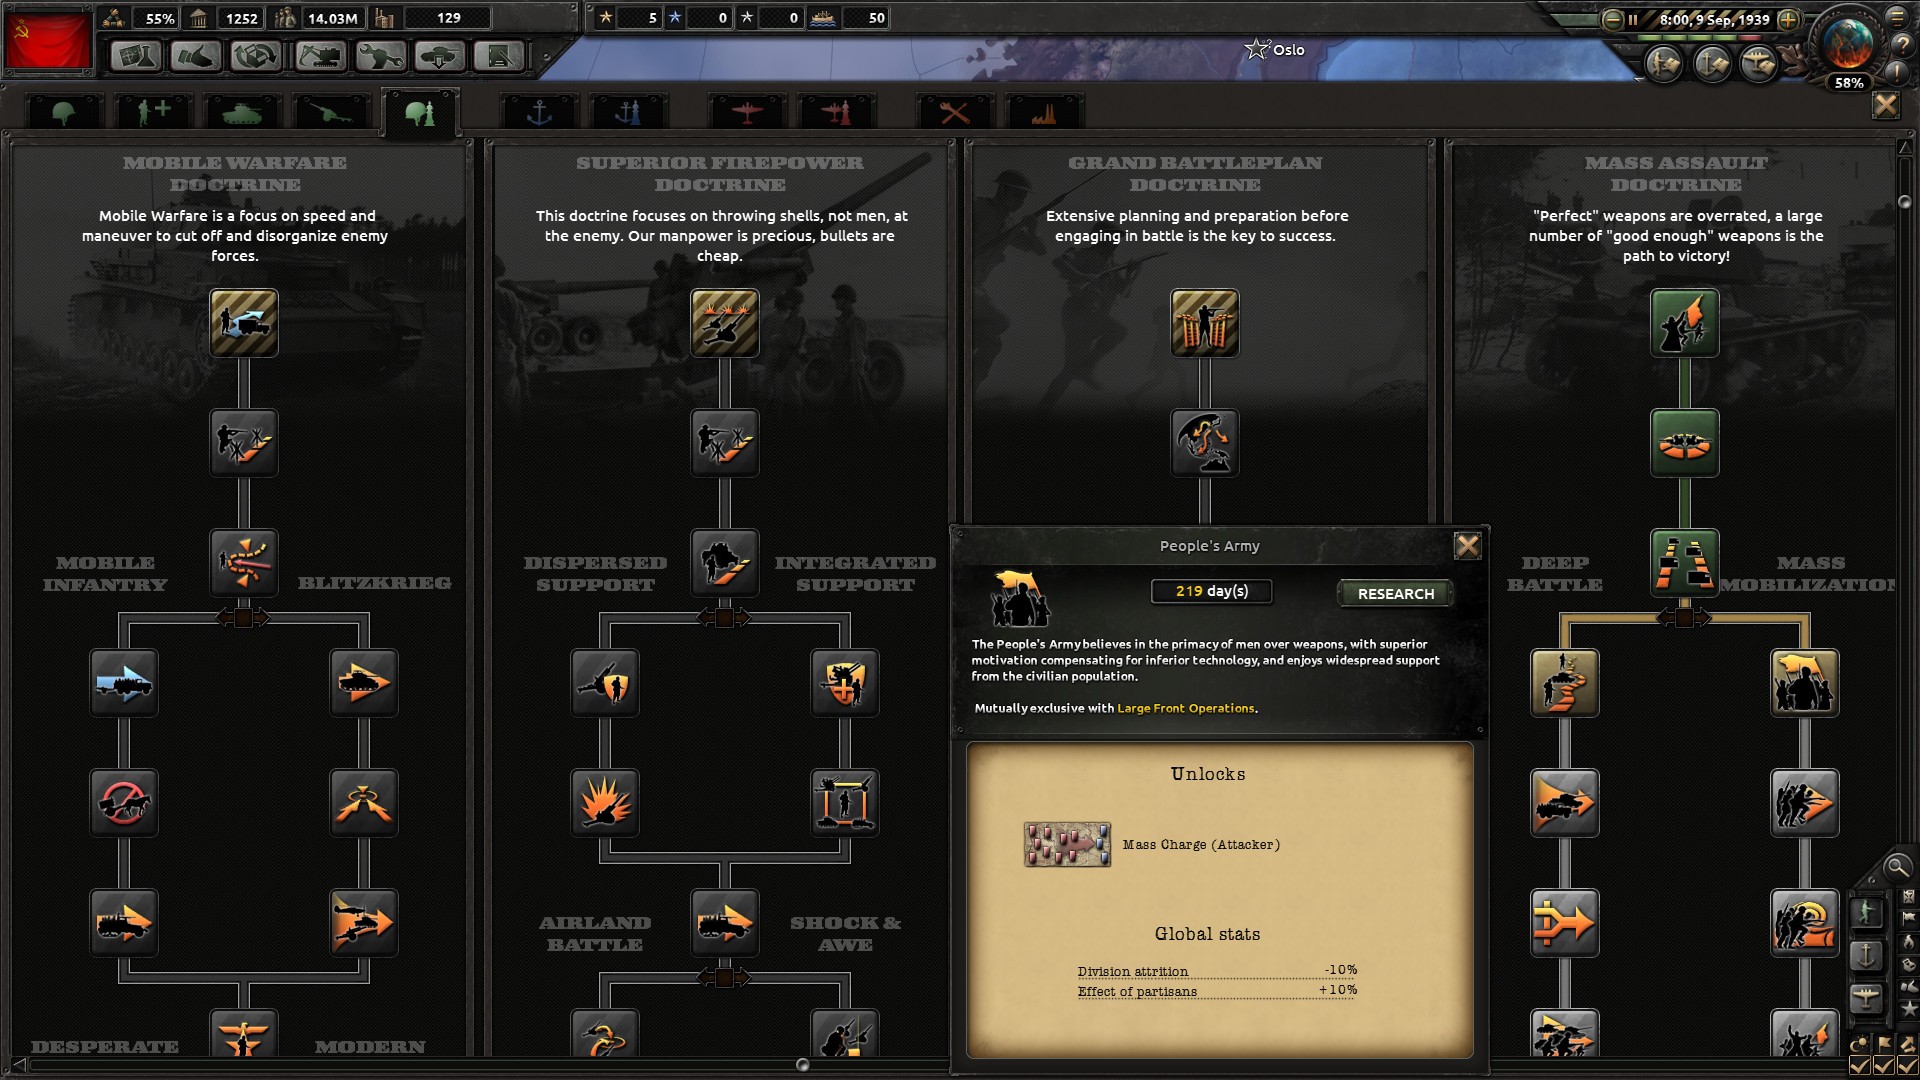 hearts of iron 4 steam discussion